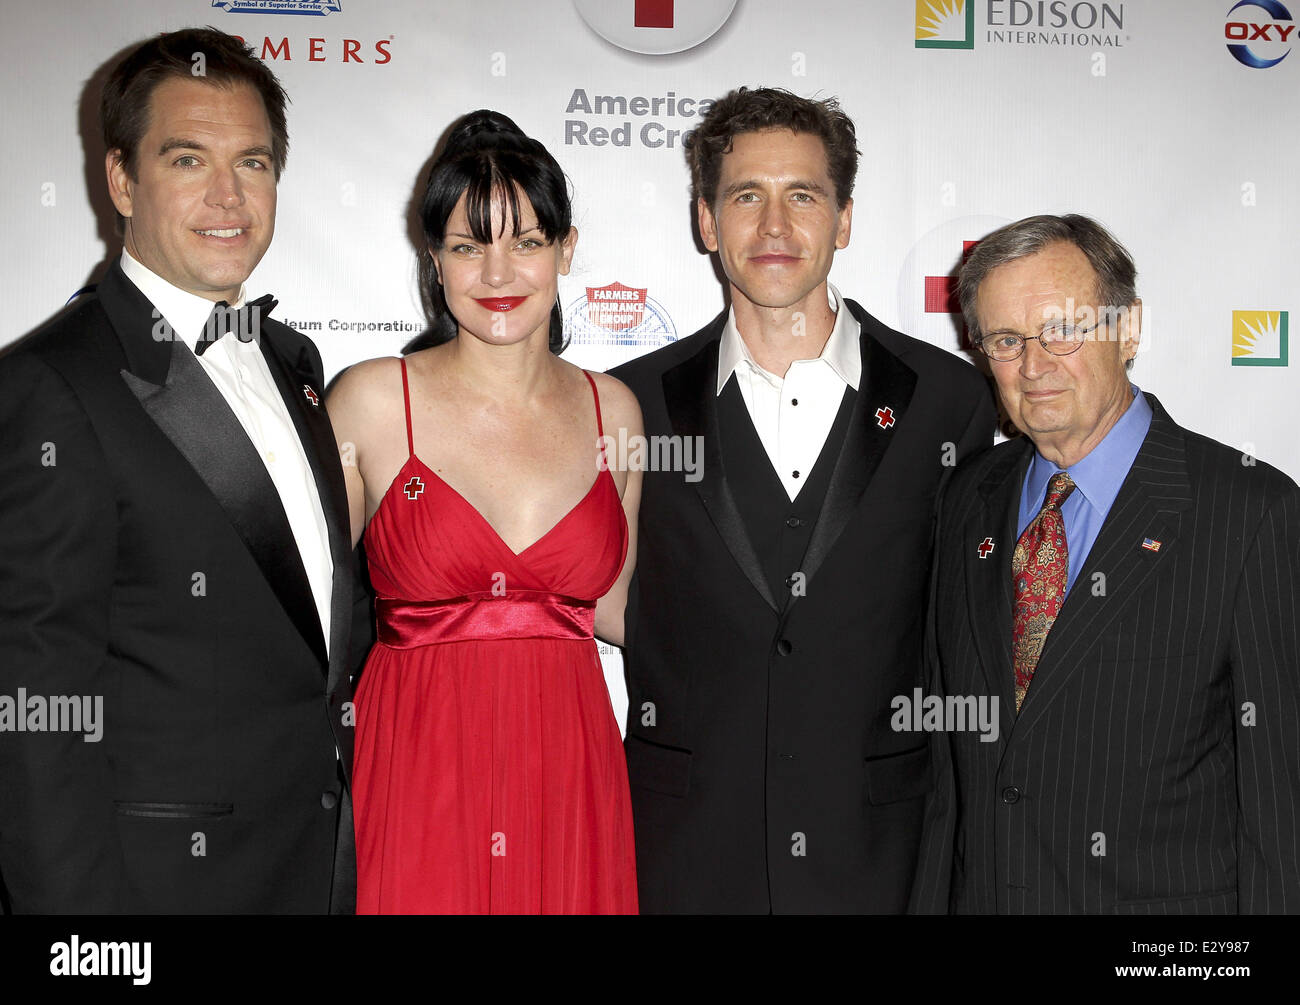 Members of the Armed Forces and the cast of 'NCIS' honoured at the 'Annual Red Cross Red Tie Affair' - Arrivals  Featuring: Michael Weatherly,Pauley Perrette,Brian Dietzen,David McCallum Where: Santa Monica, California, United States When: 06 Apr 2013 Stock Photo